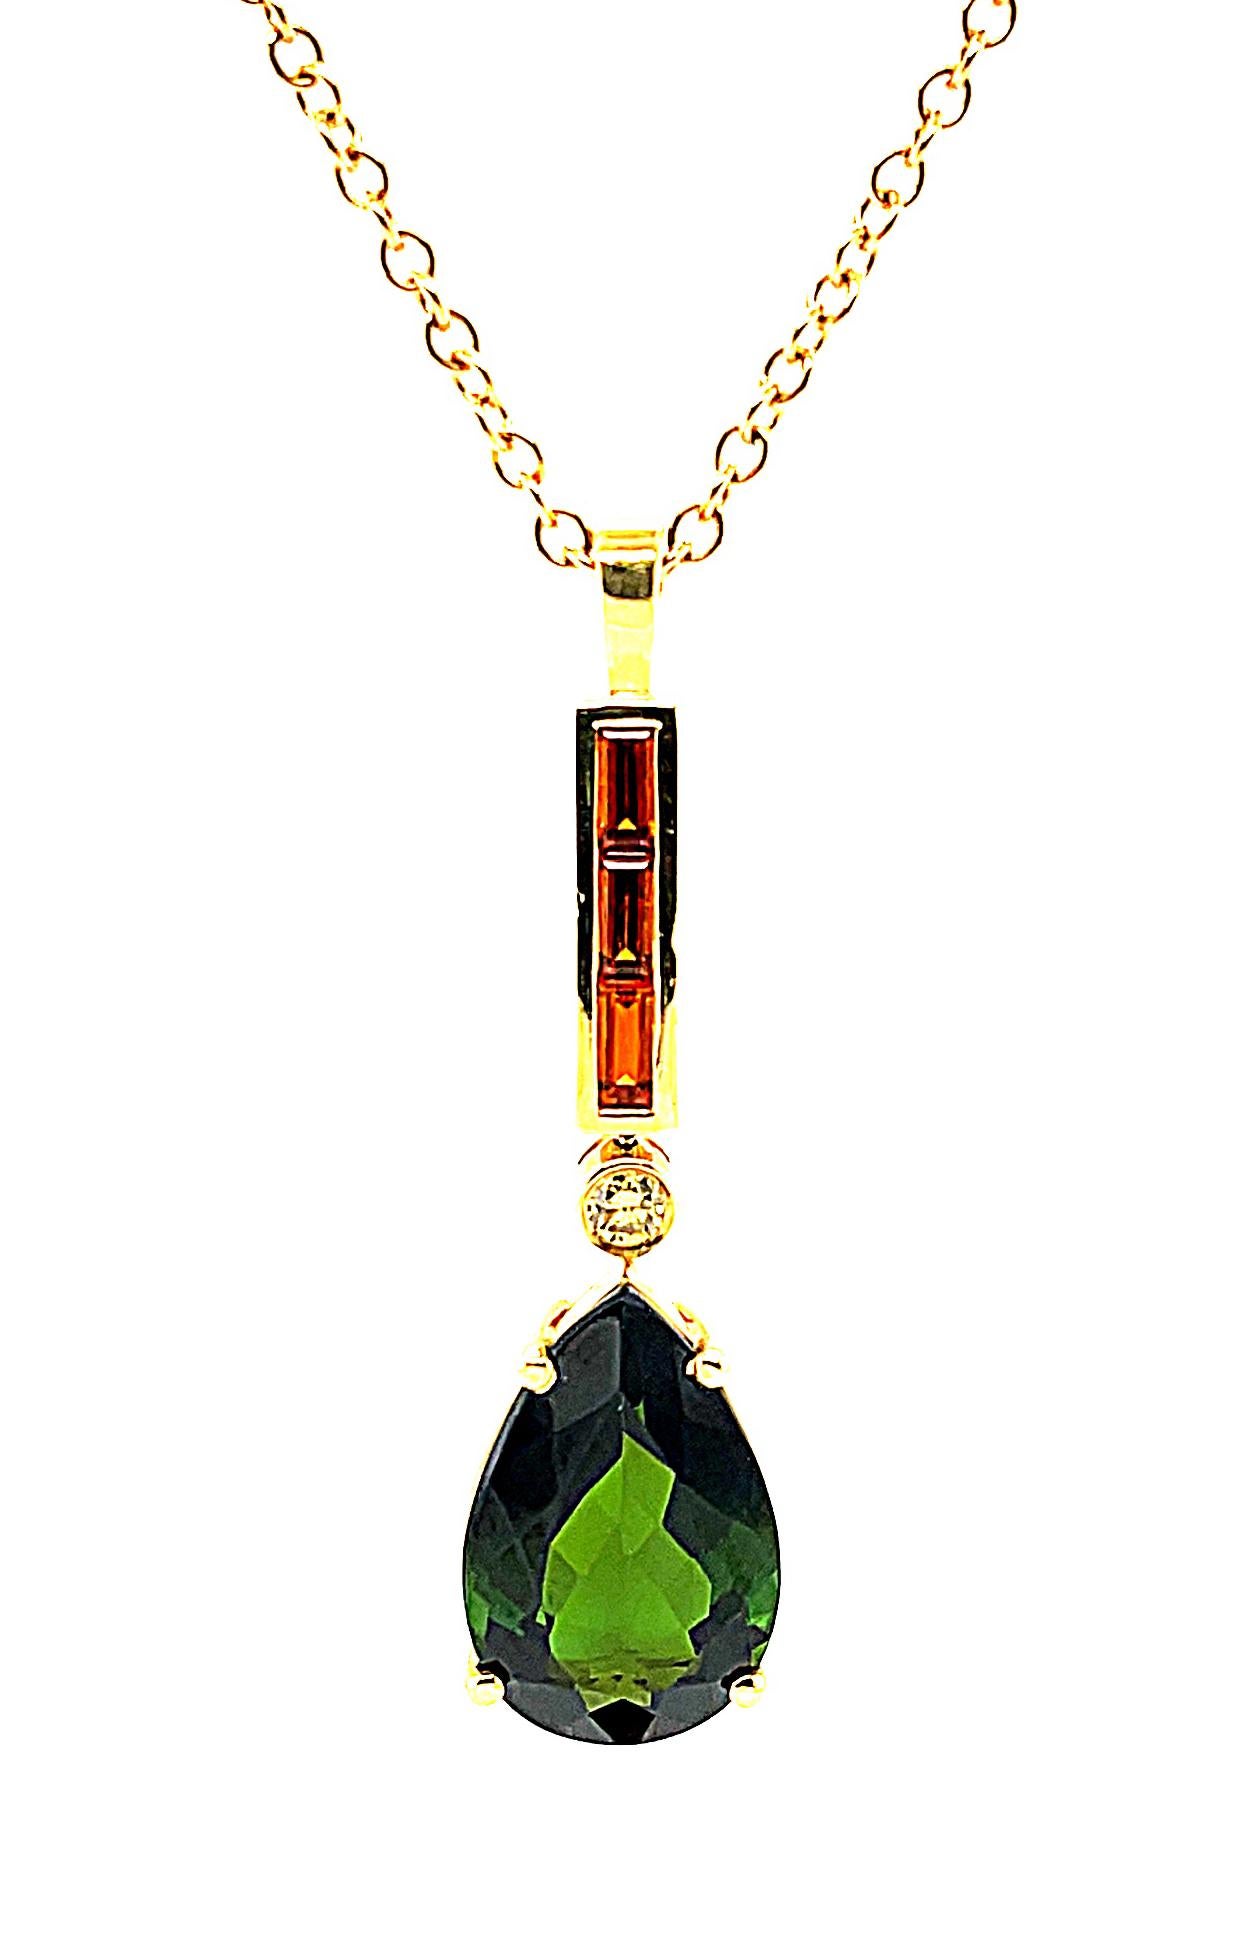 This drop pendant has a modern, Art Deco vibe! It is part of our 